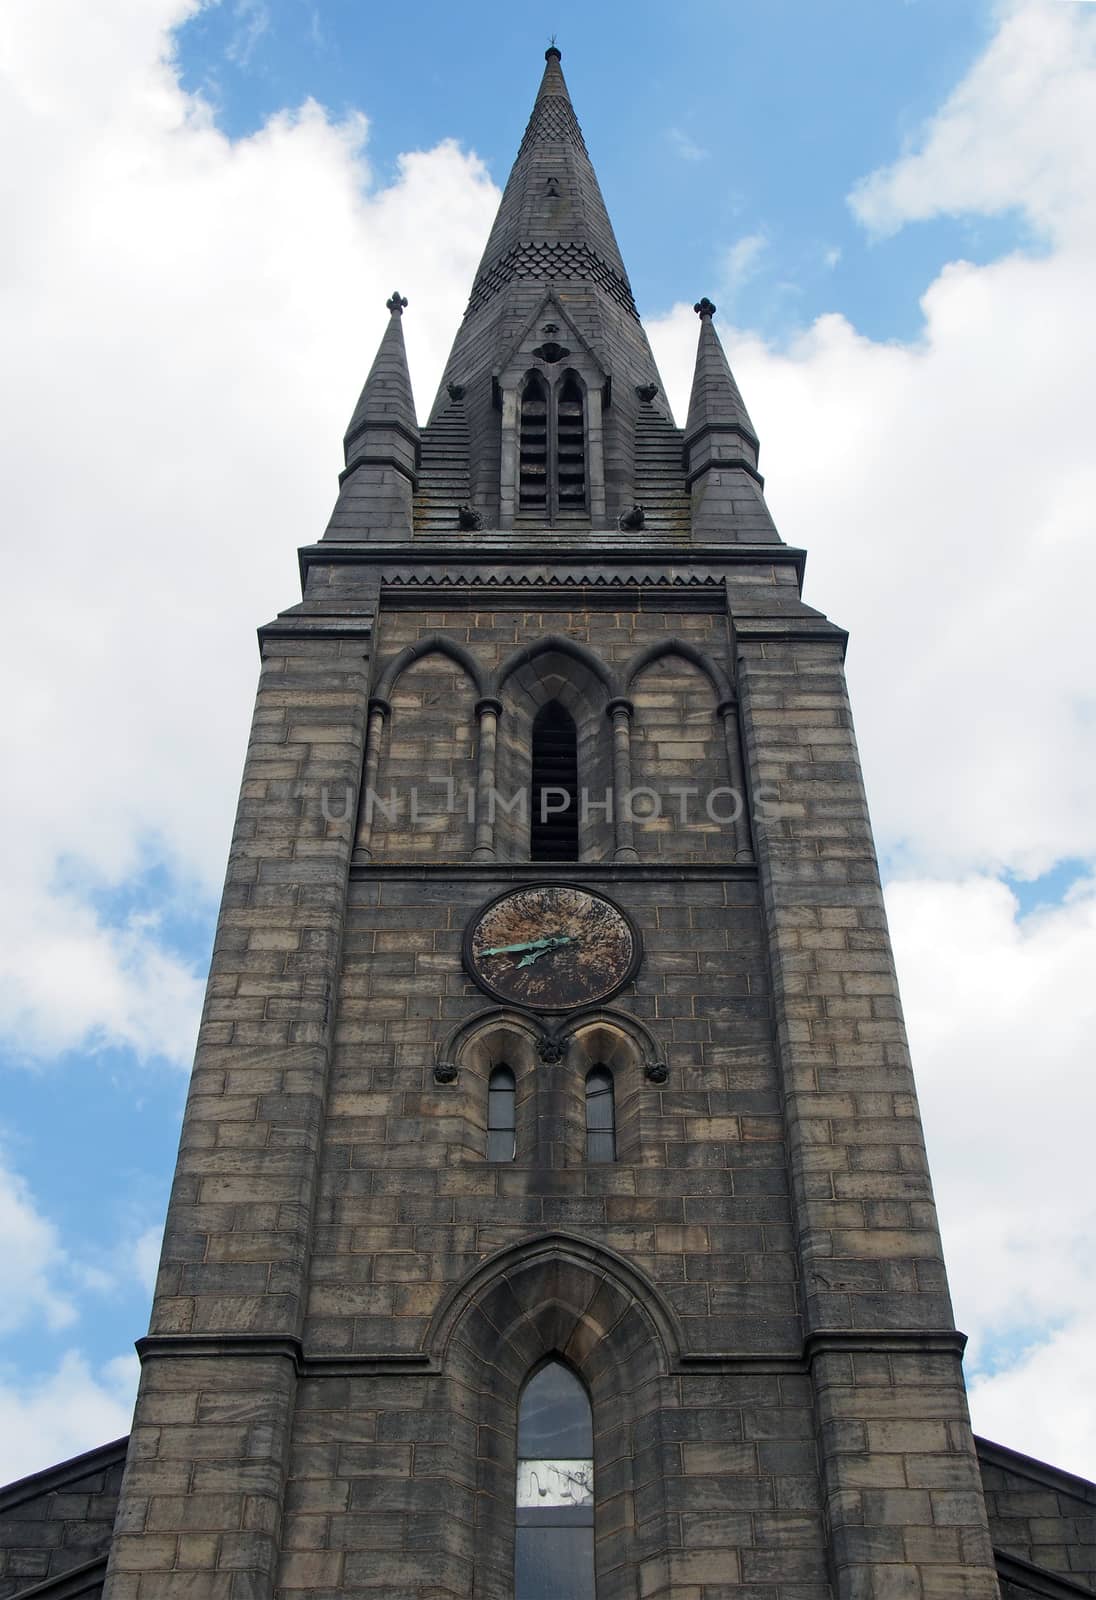 spire of the former church of saint matthews in holbeck in leeds built in 1832 famous for being the burial place of matthew murray the engineer and inventor by philopenshaw